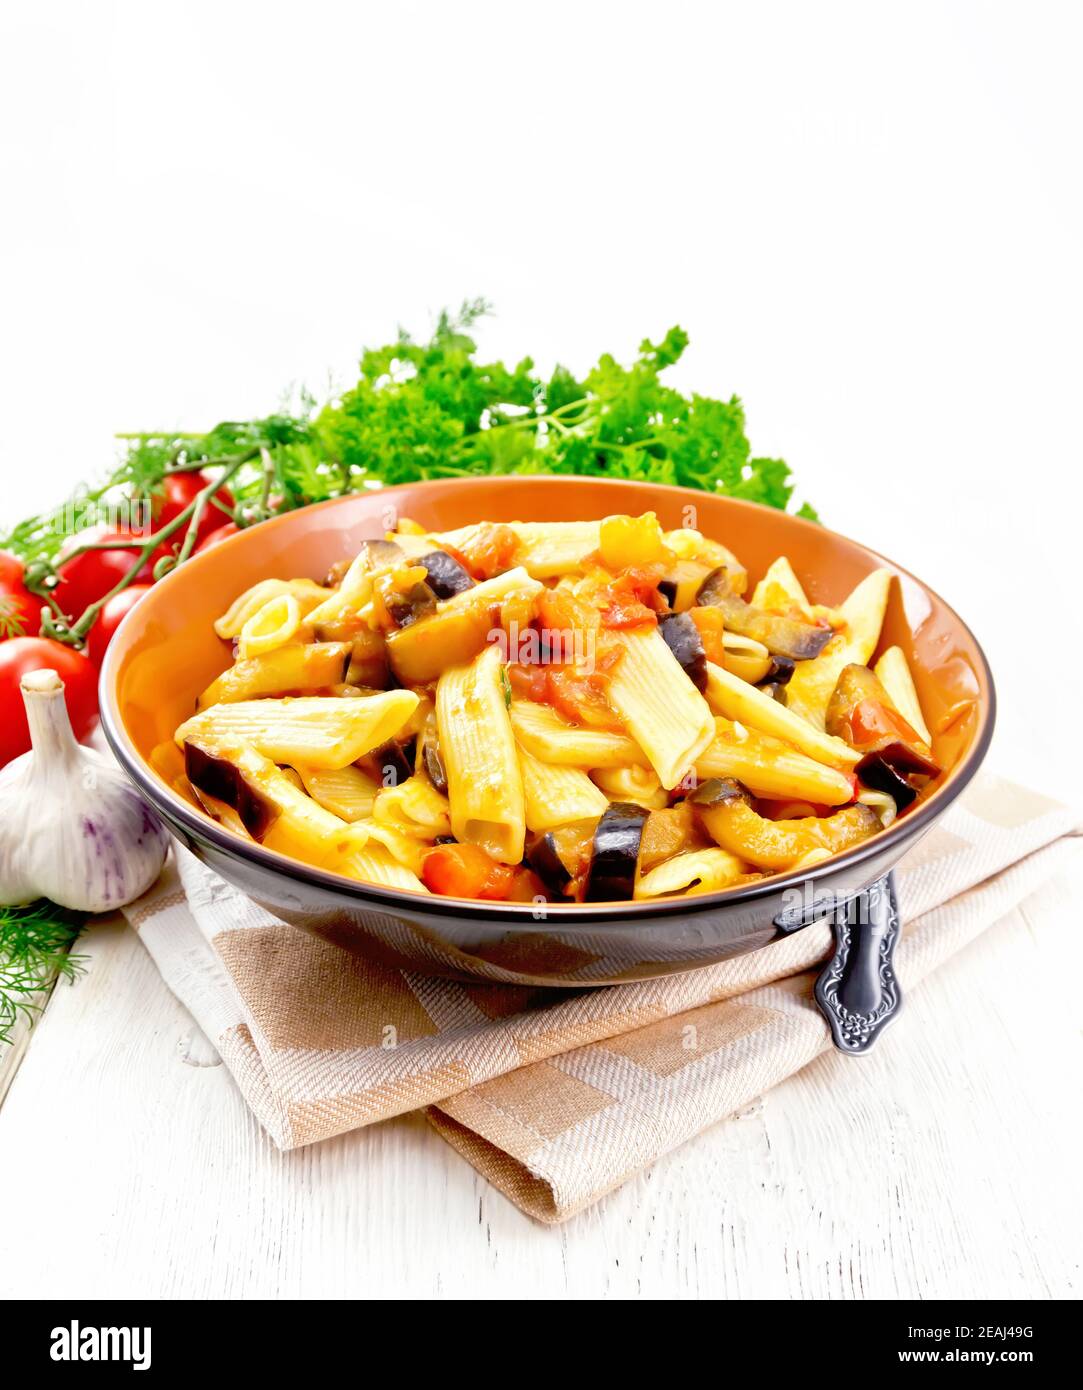 Pasta penne with eggplant and tomatoes on napkin Stock Photo